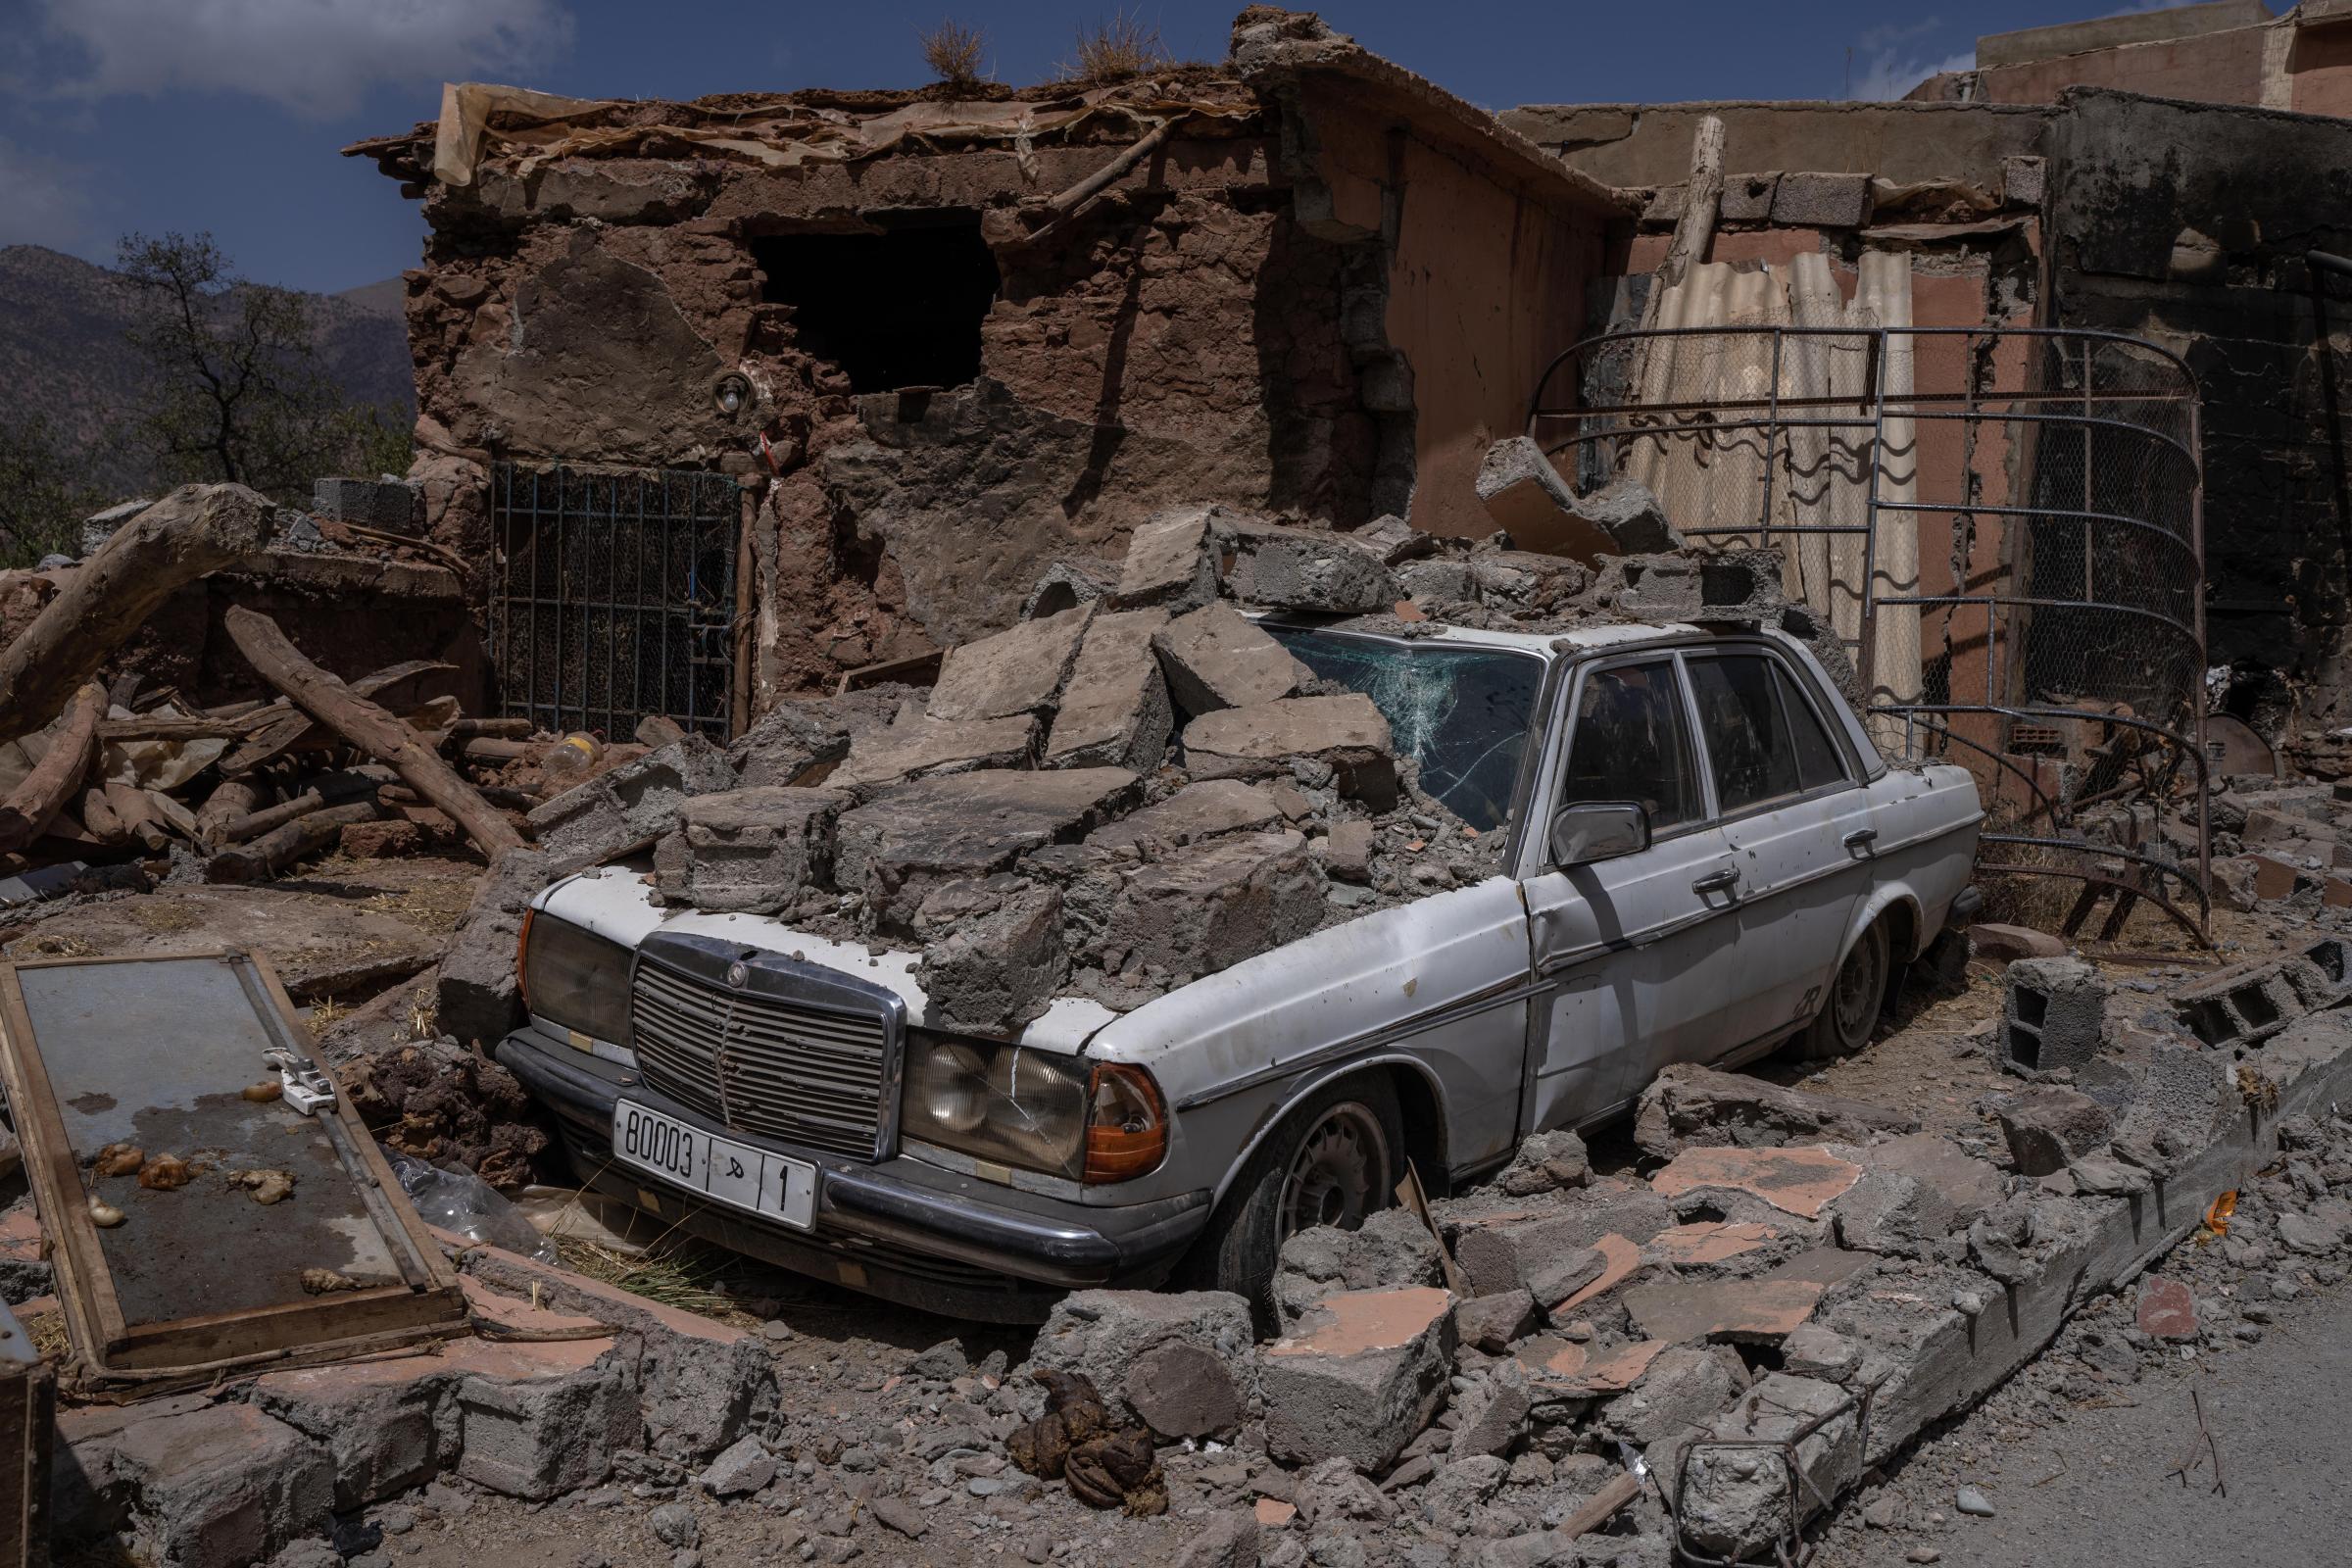 Morocco Earthquake - Damages from a deadly earthquake on the Tizi-N-Test pass...